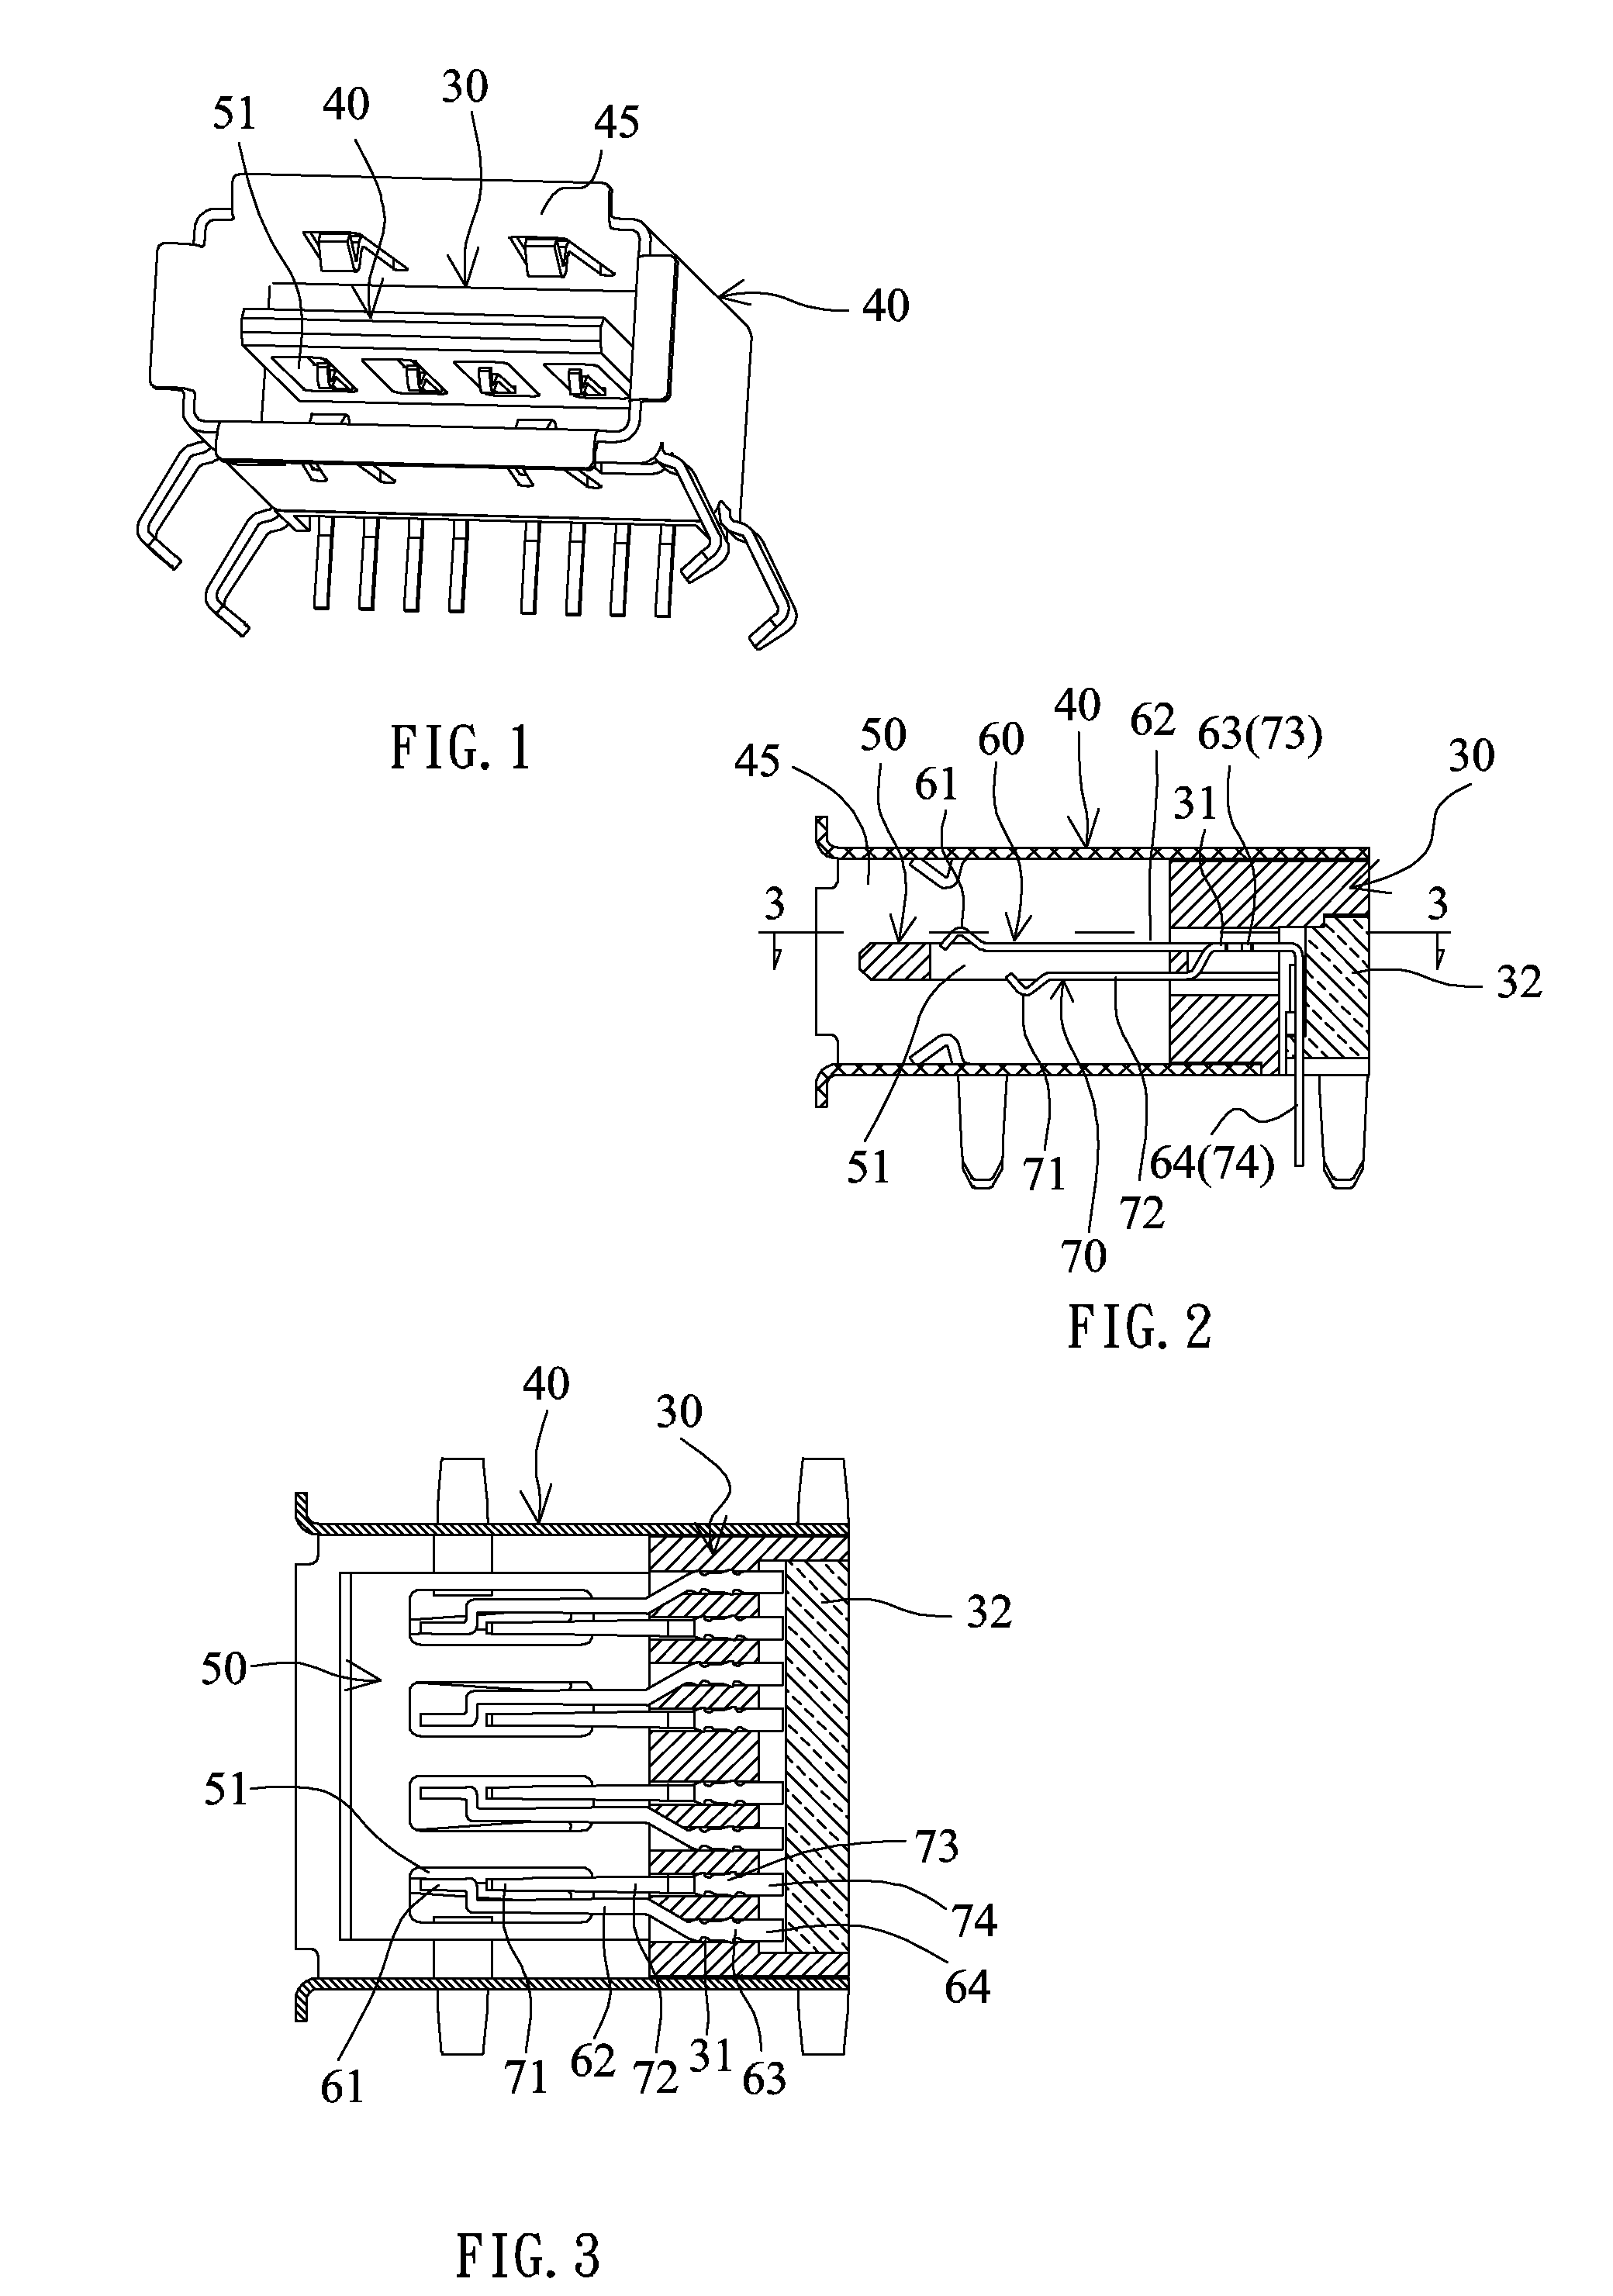 Socket structure with duplex electrical connection